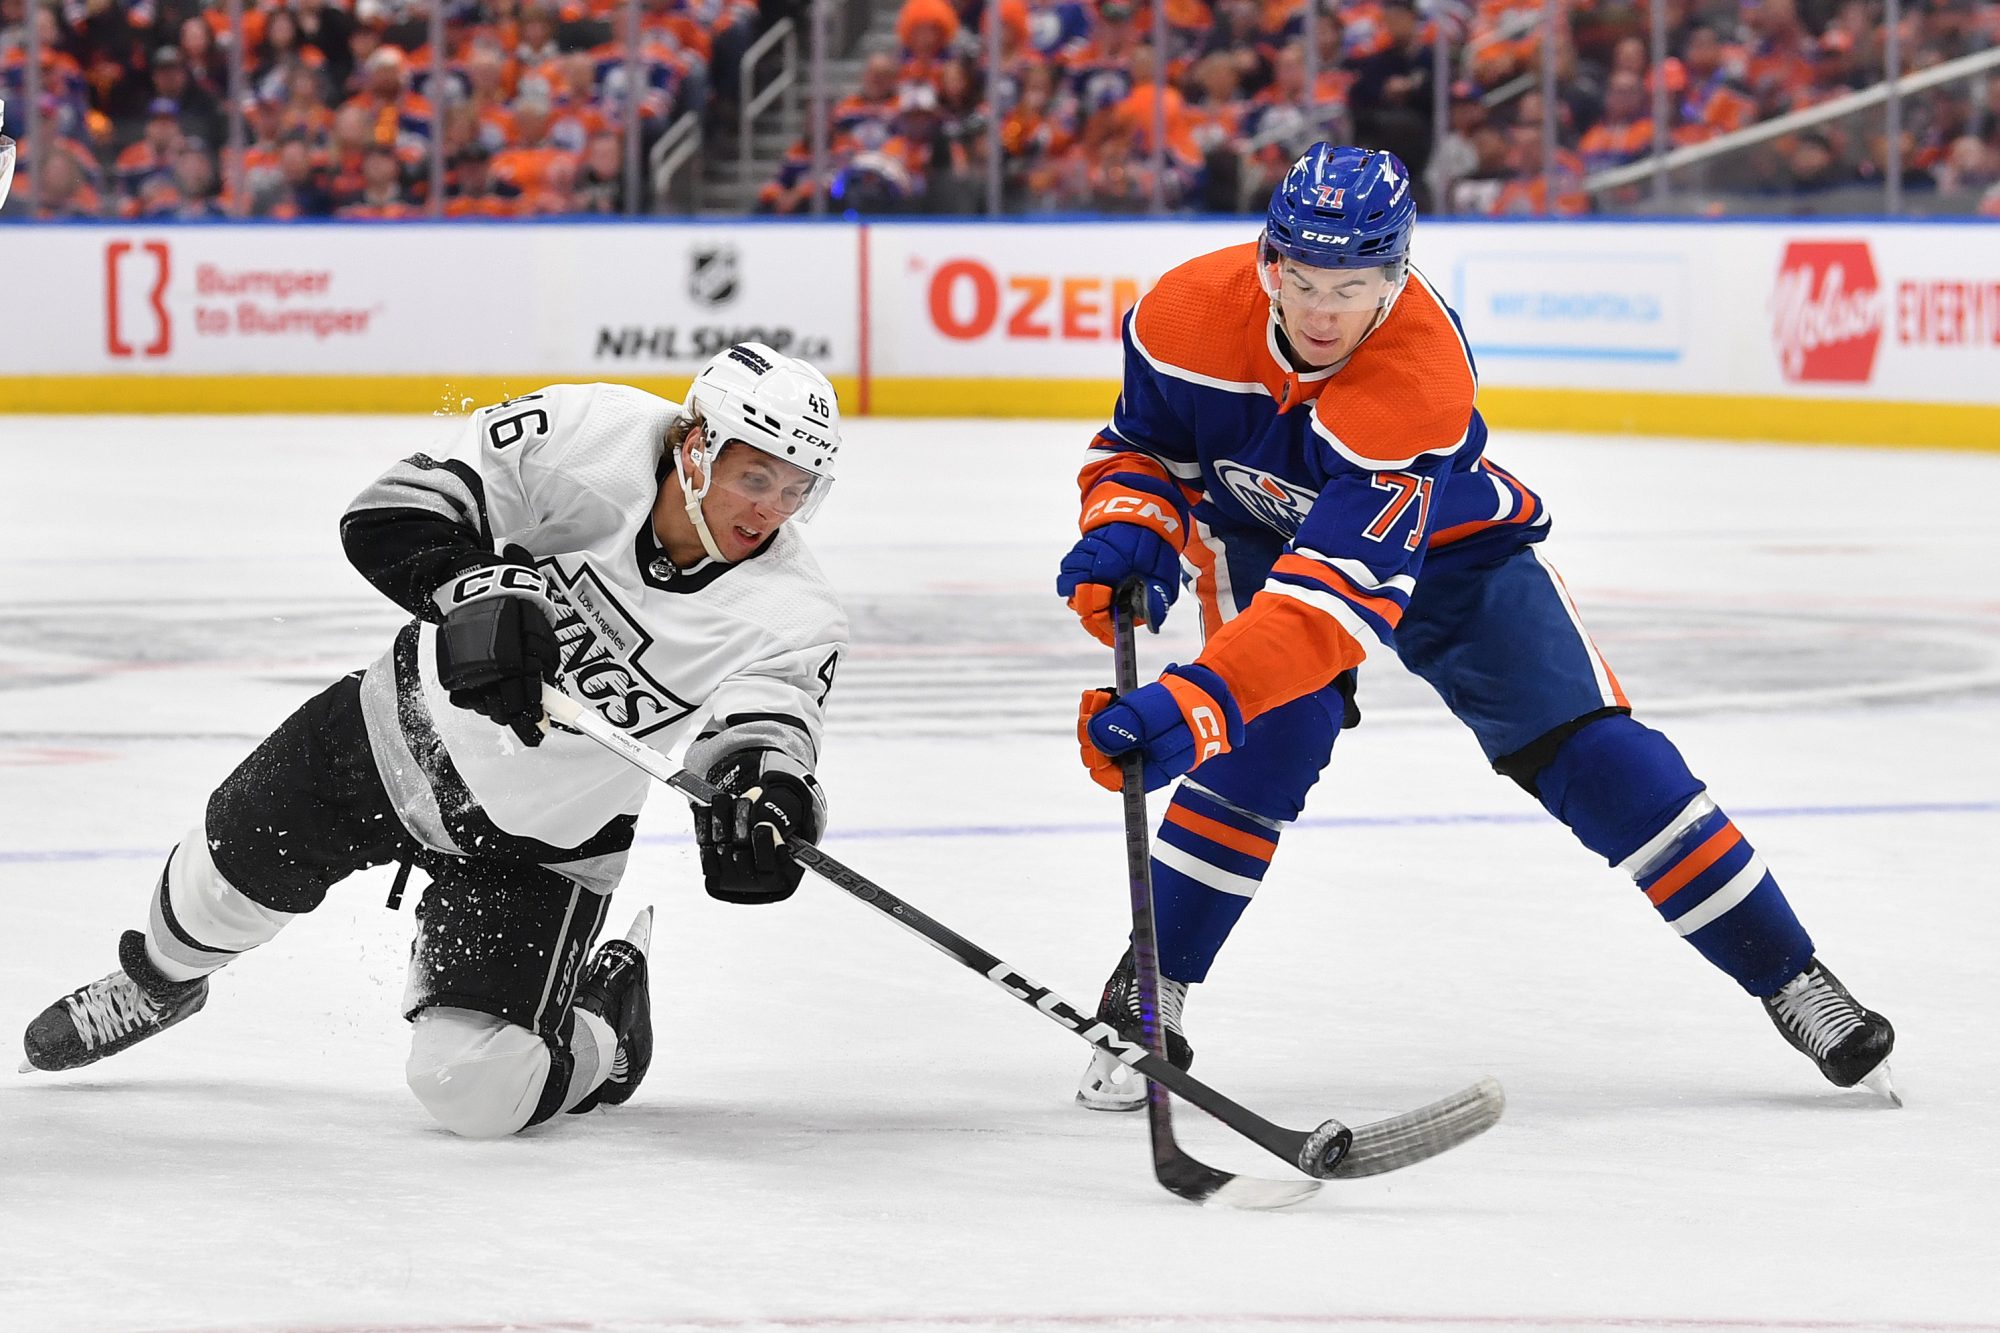 The Oilers and Kings will square off in Game 2 of their first round series on Wednesday.